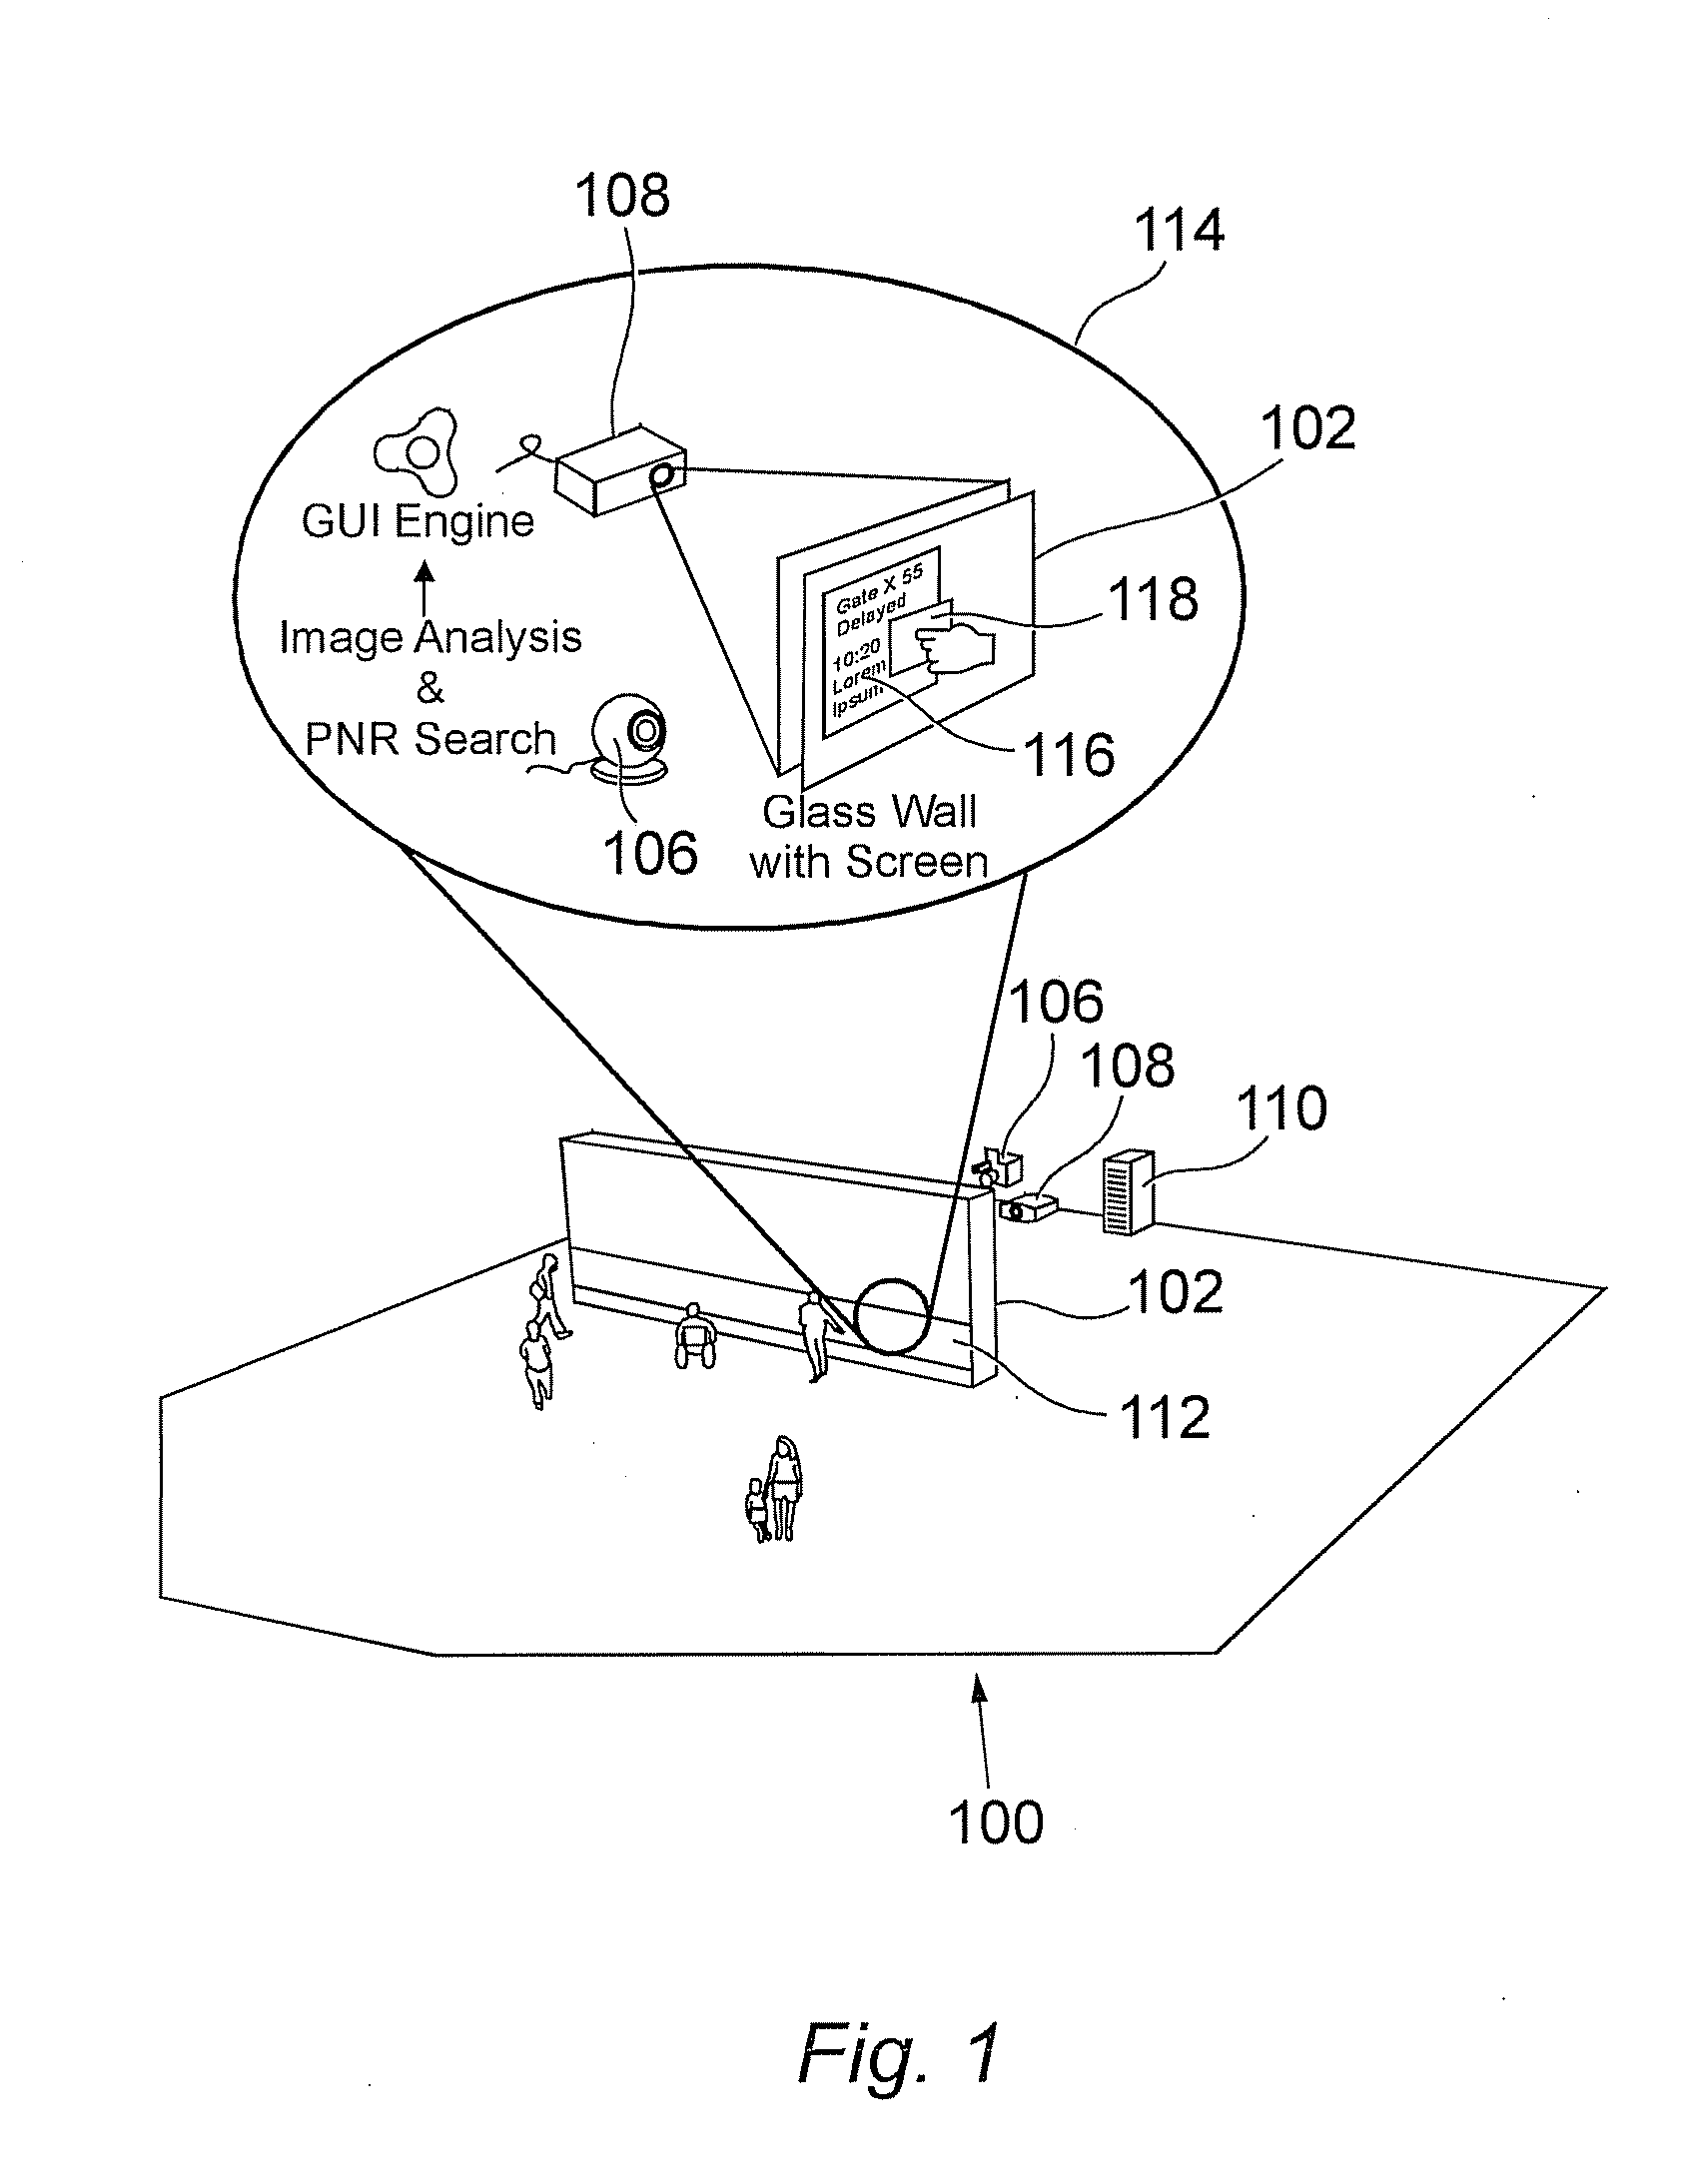 Personal information display system and associated method